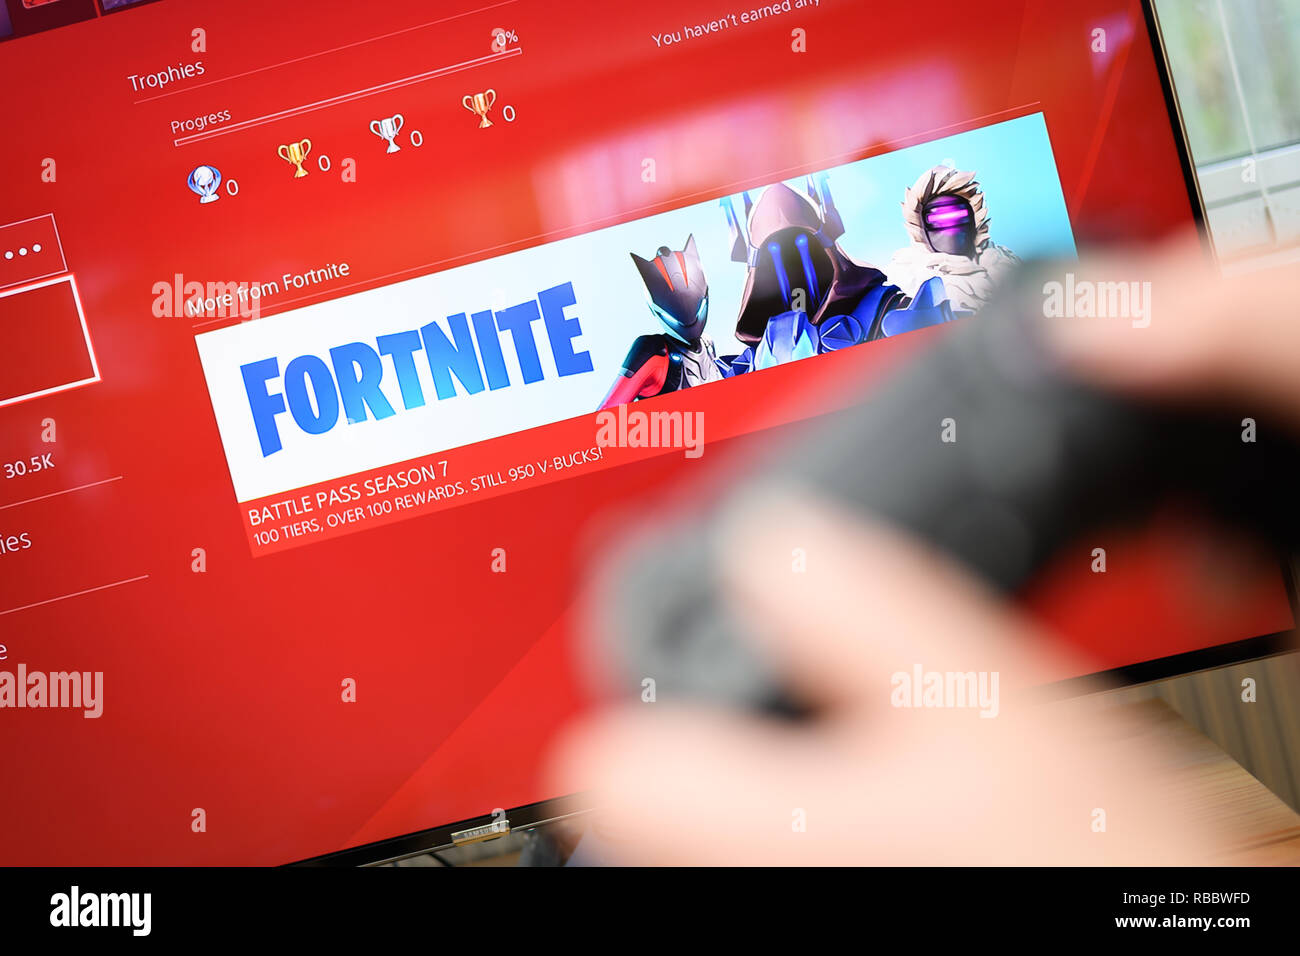 Cardiff, Wales - January 09, 2019:  Fortnite video game on PlayStation menu, Fortnite is a web based multi player survival game developed by Epic Game Stock Photo